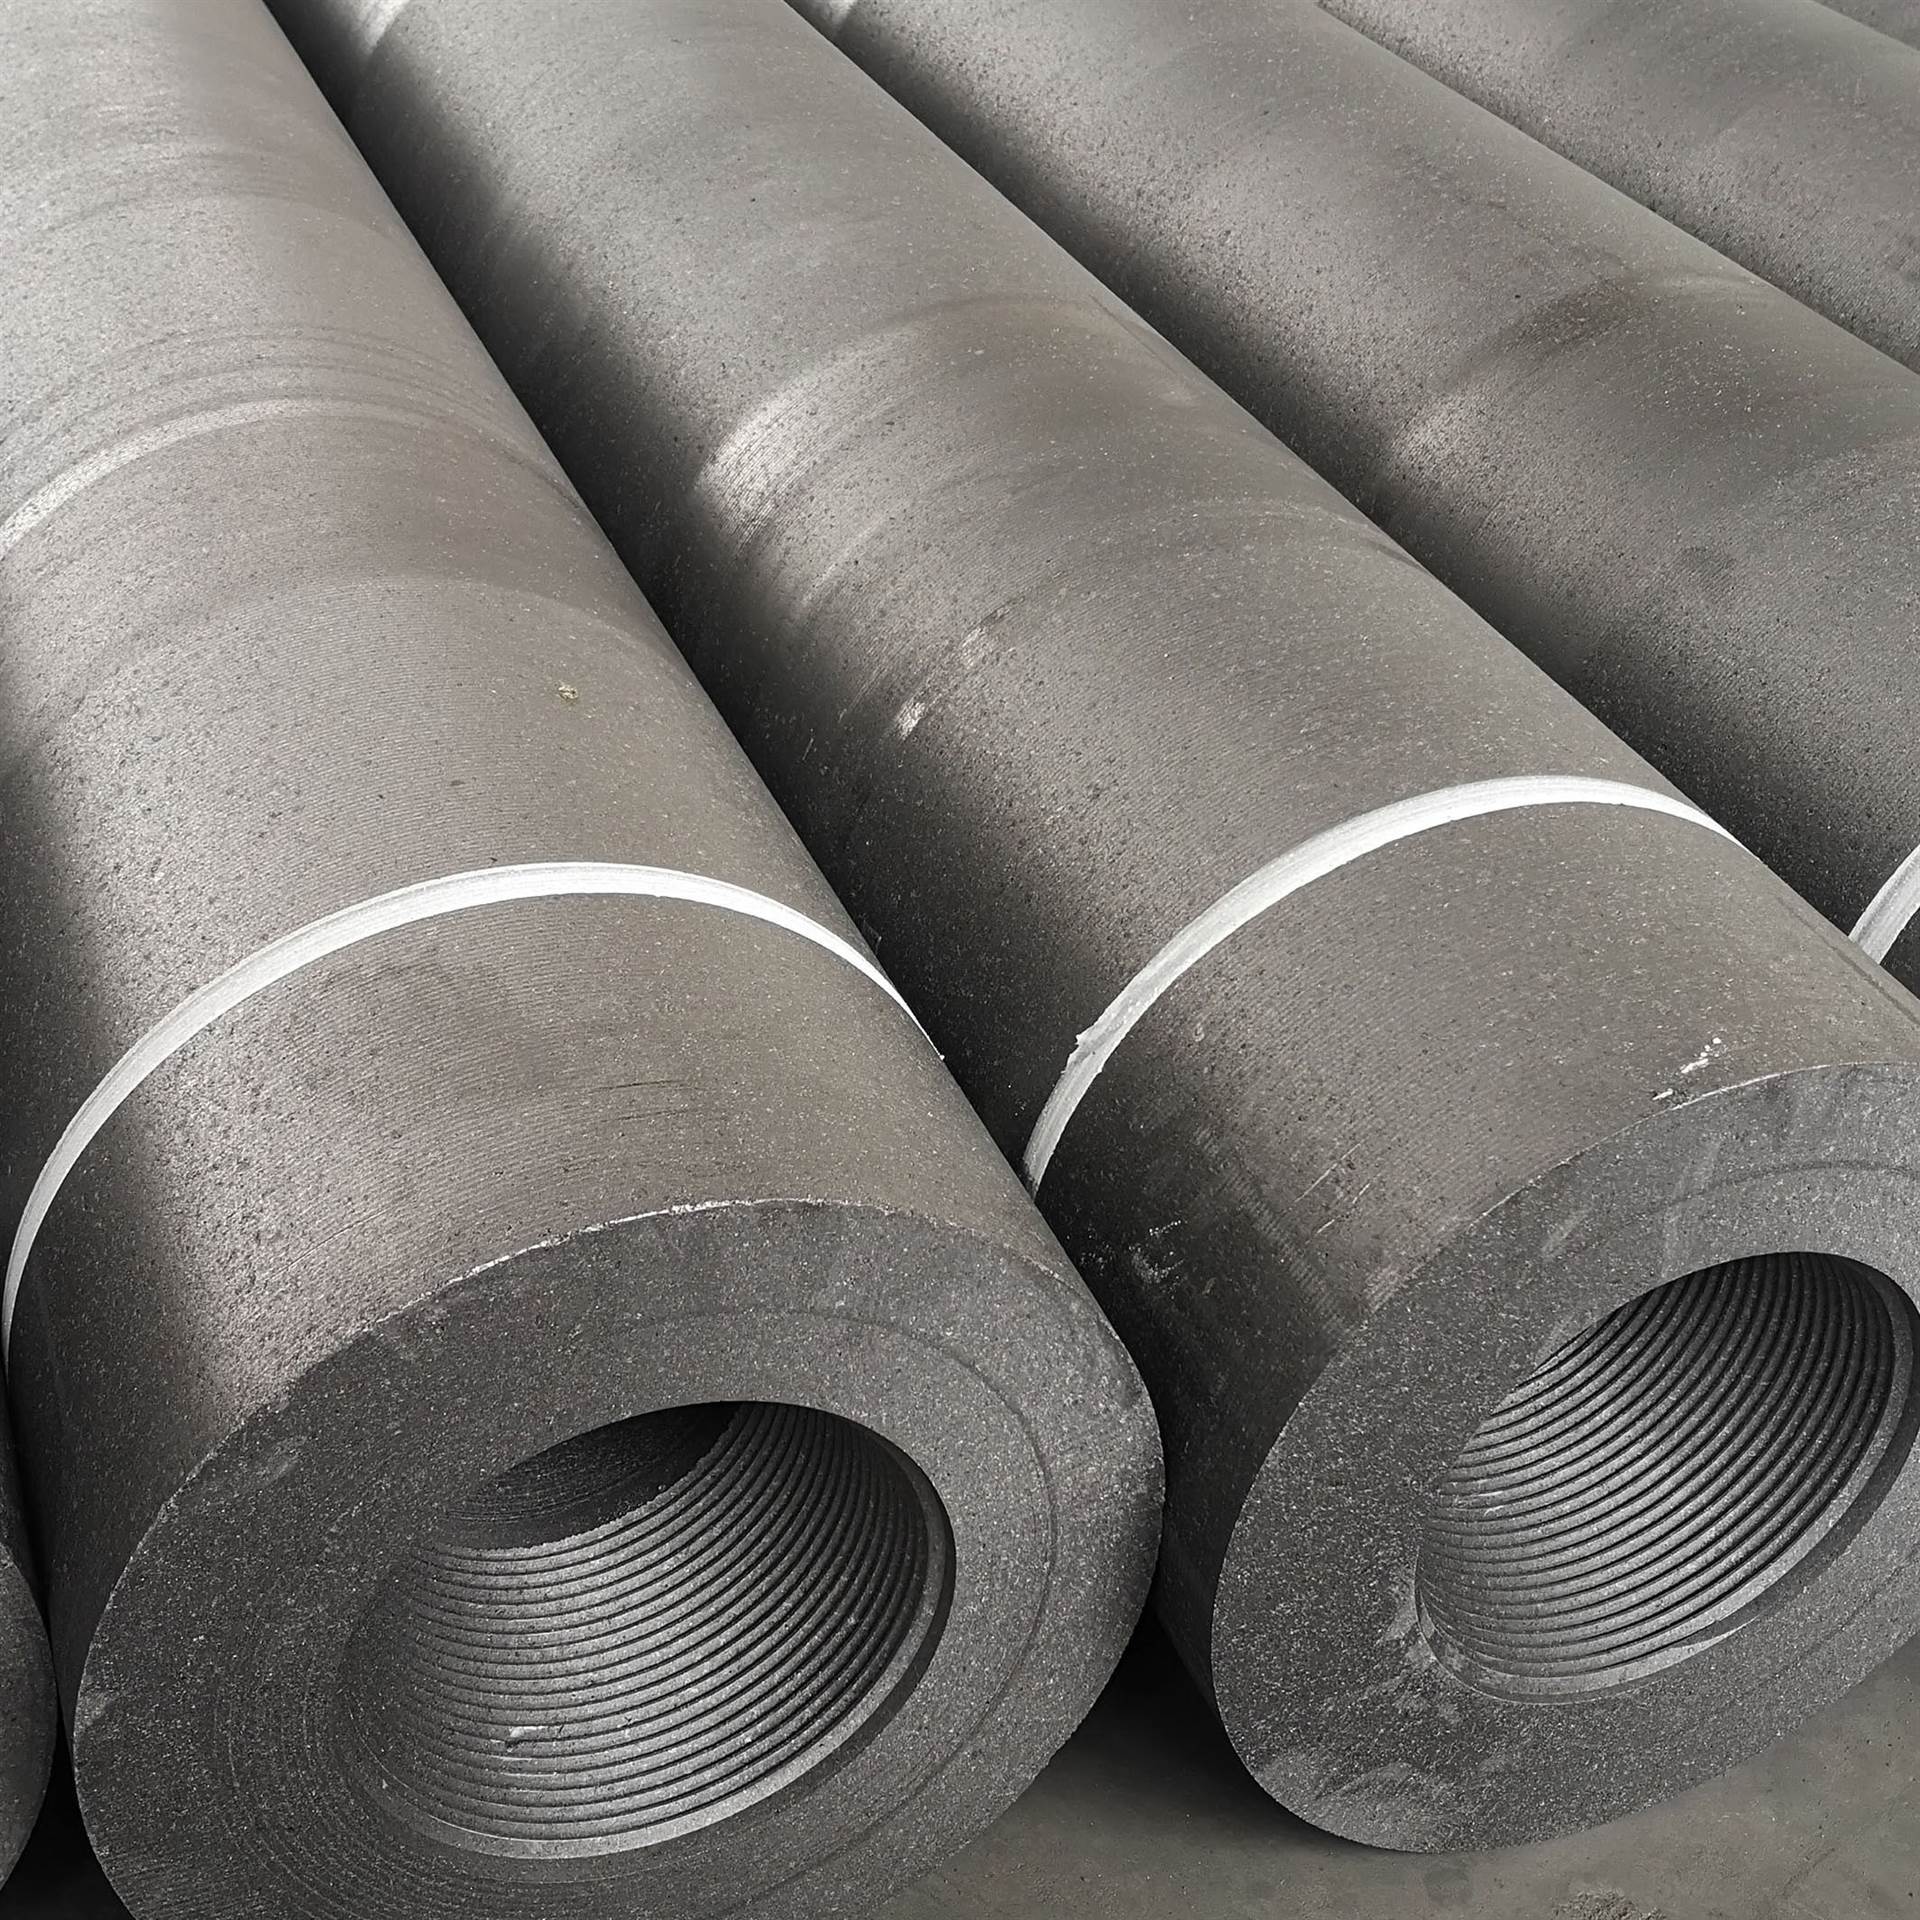 Russia is a net importer of graphite electrodes